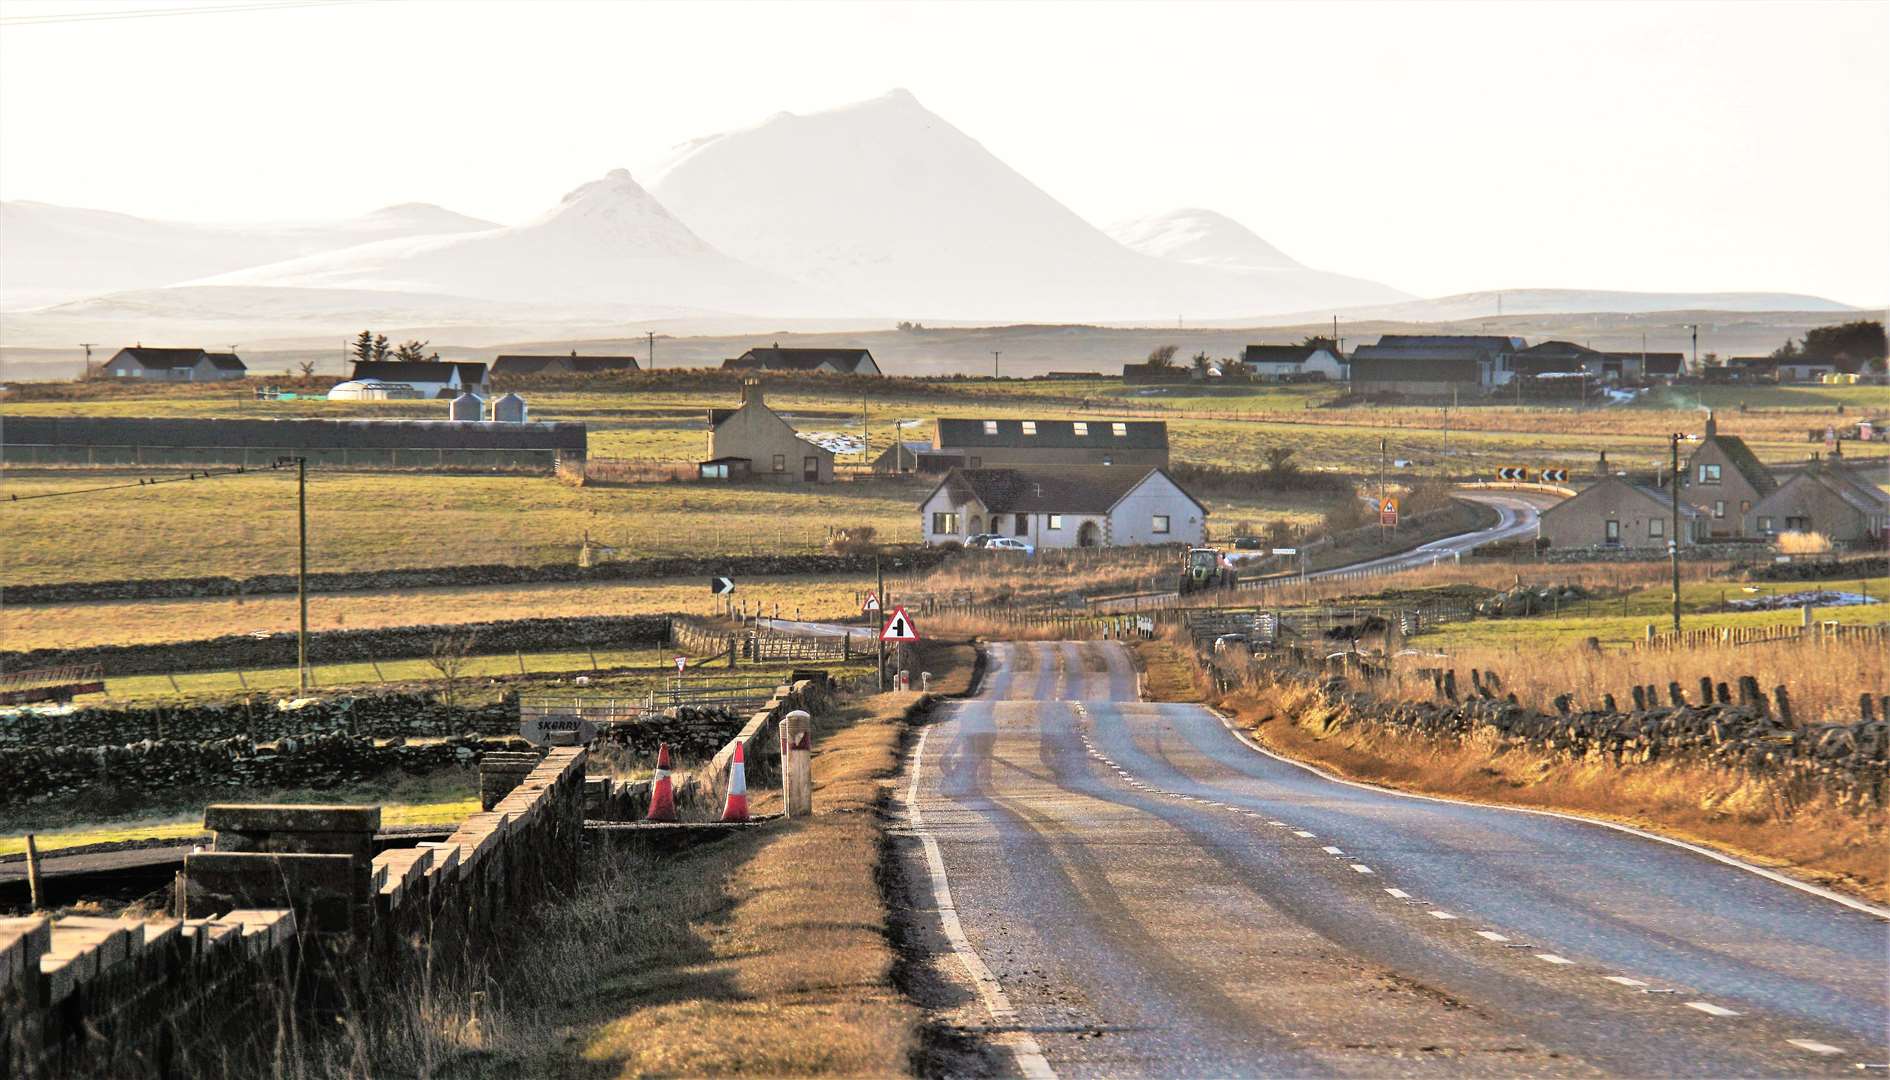 View towards the Scaraben hills from near Occumster, Caithness. Picture: DGS